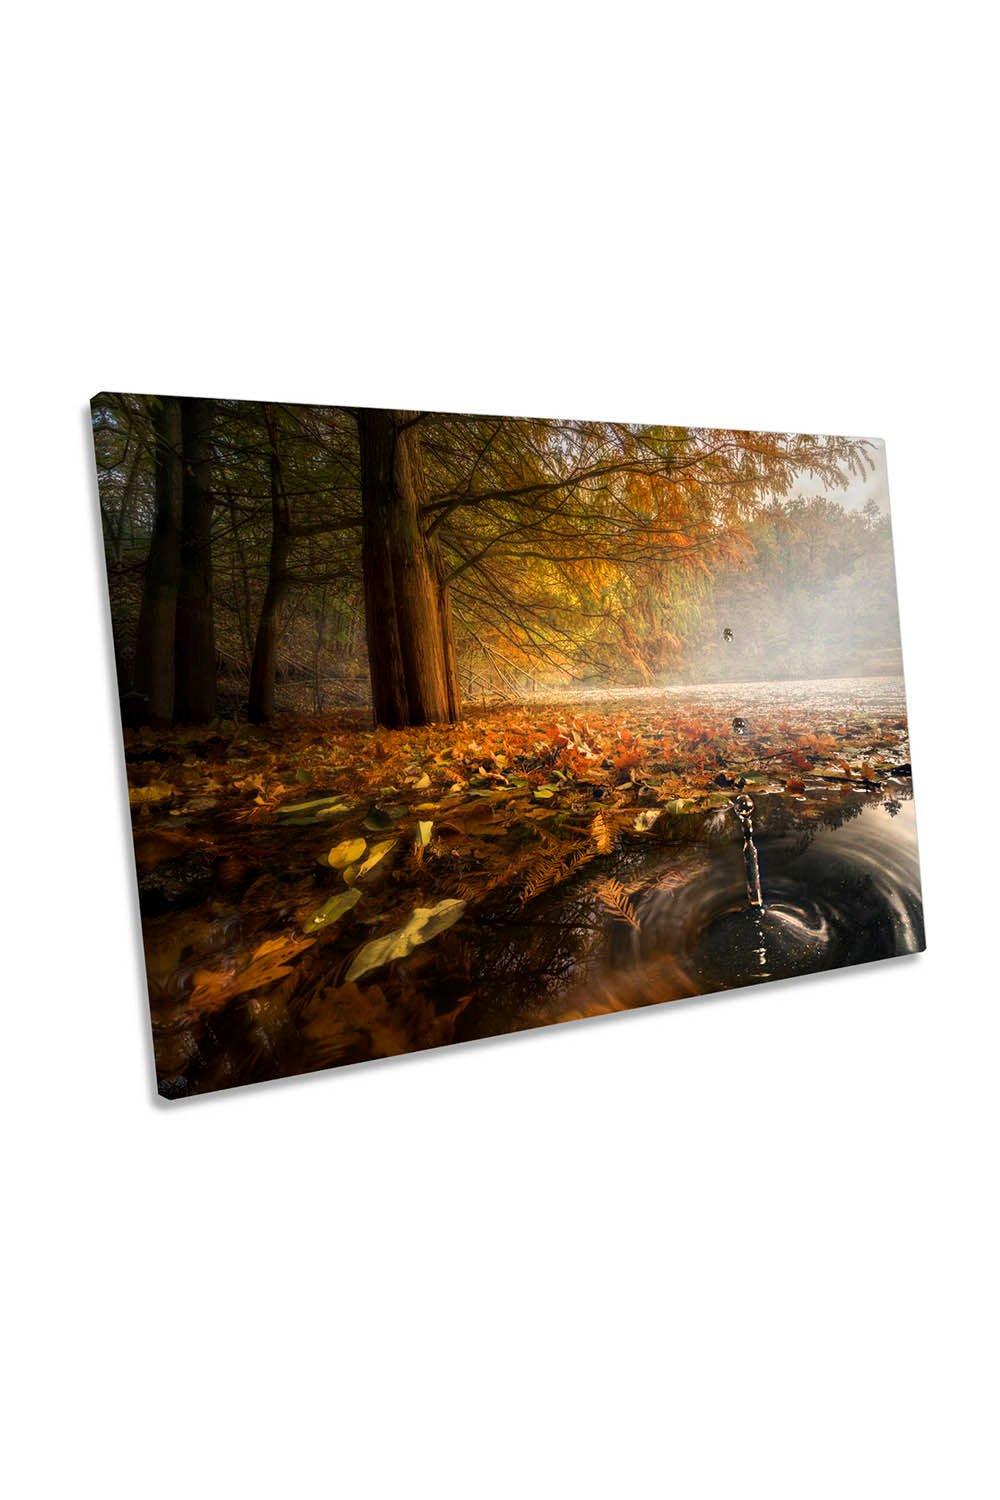 Drops in Autumn Colour Forest Canvas Wall Art Picture Print